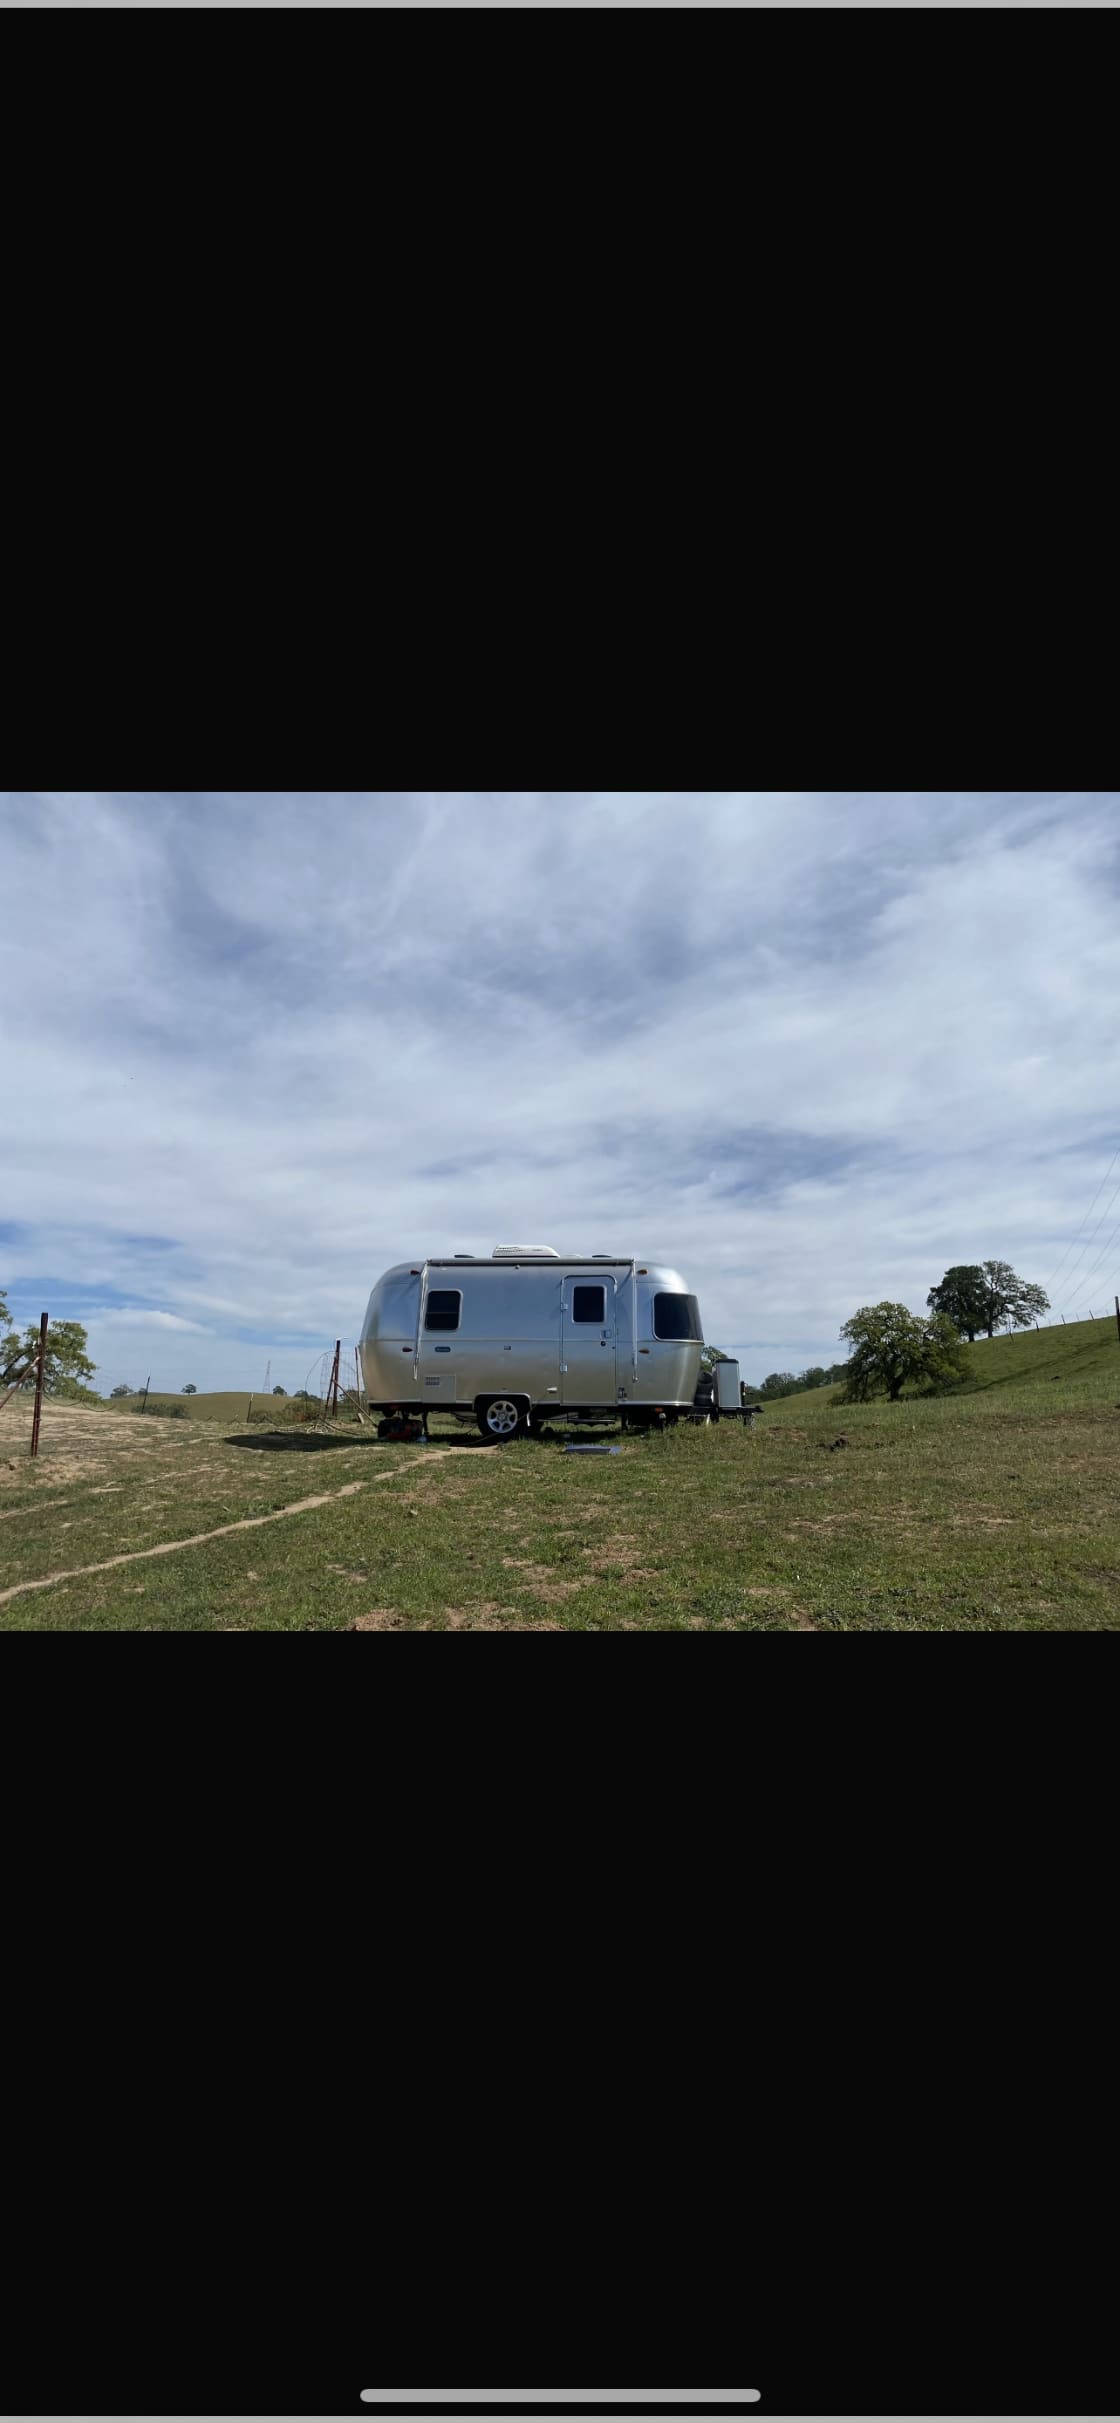 Ingersoll Ranch RV and Campsites